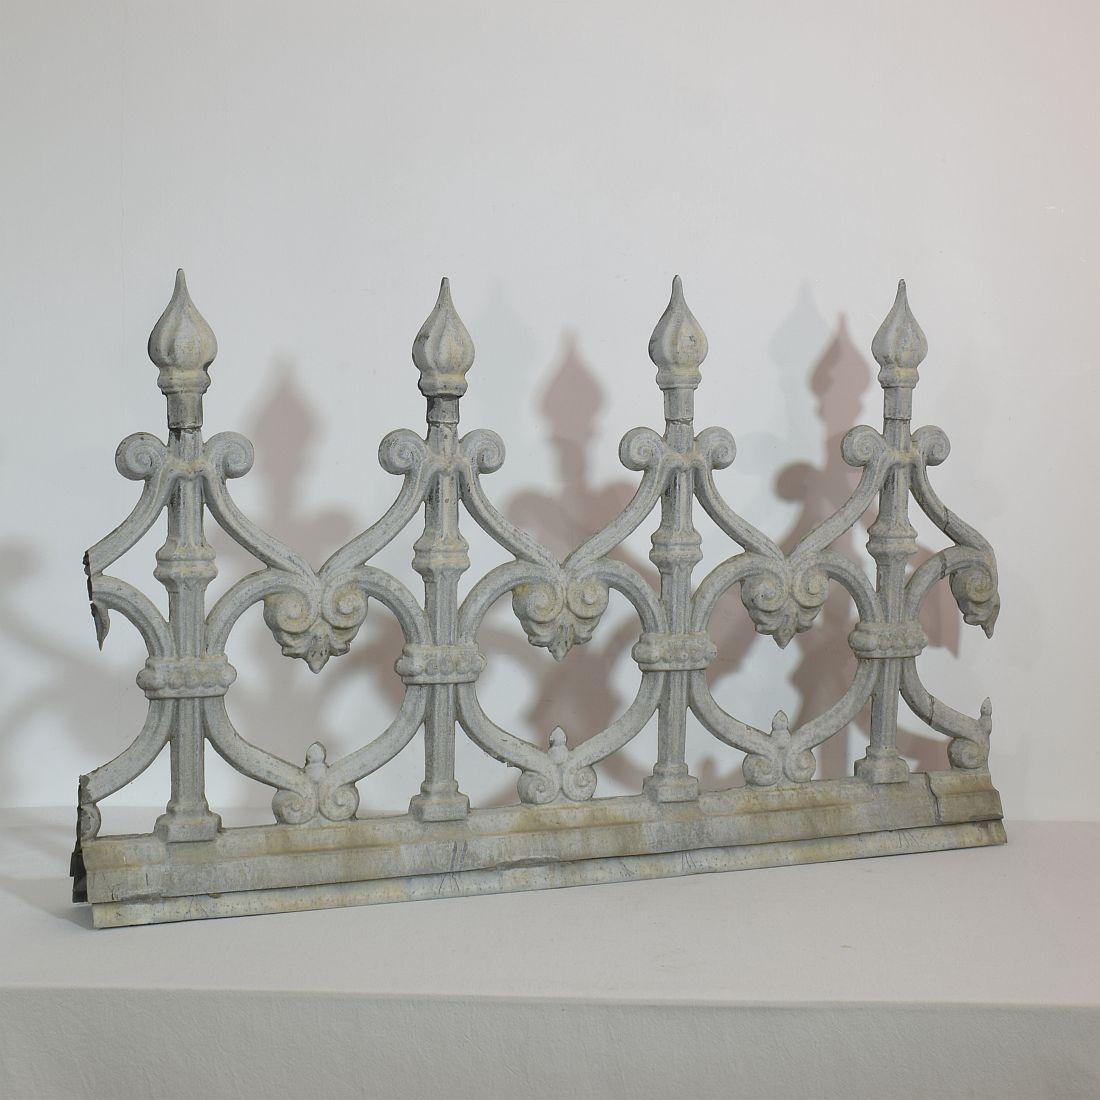 Pair of 19th Century French Zinc Architectural Roof Ornaments or Finials 8